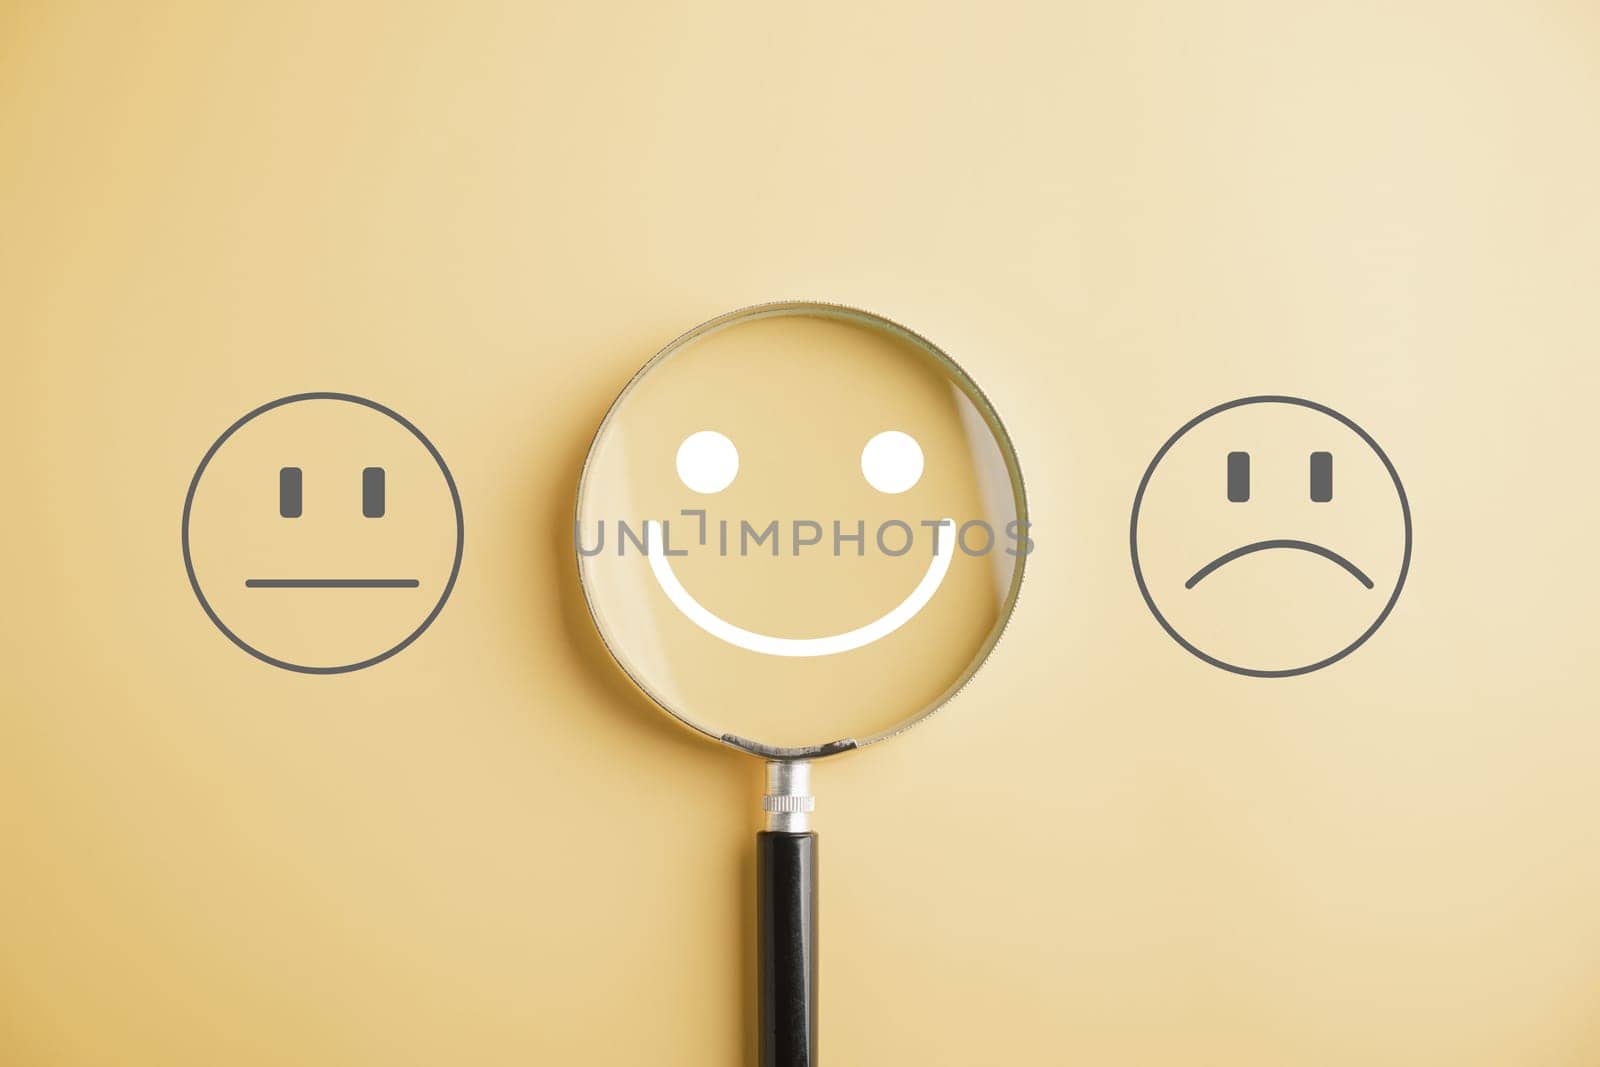 Finding happiness magnifying glass reveals smiley face icon. Customer satisfaction and evaluation post-service marketing survey. Magnification, satisfaction, reputation, corporate, customer, emotion